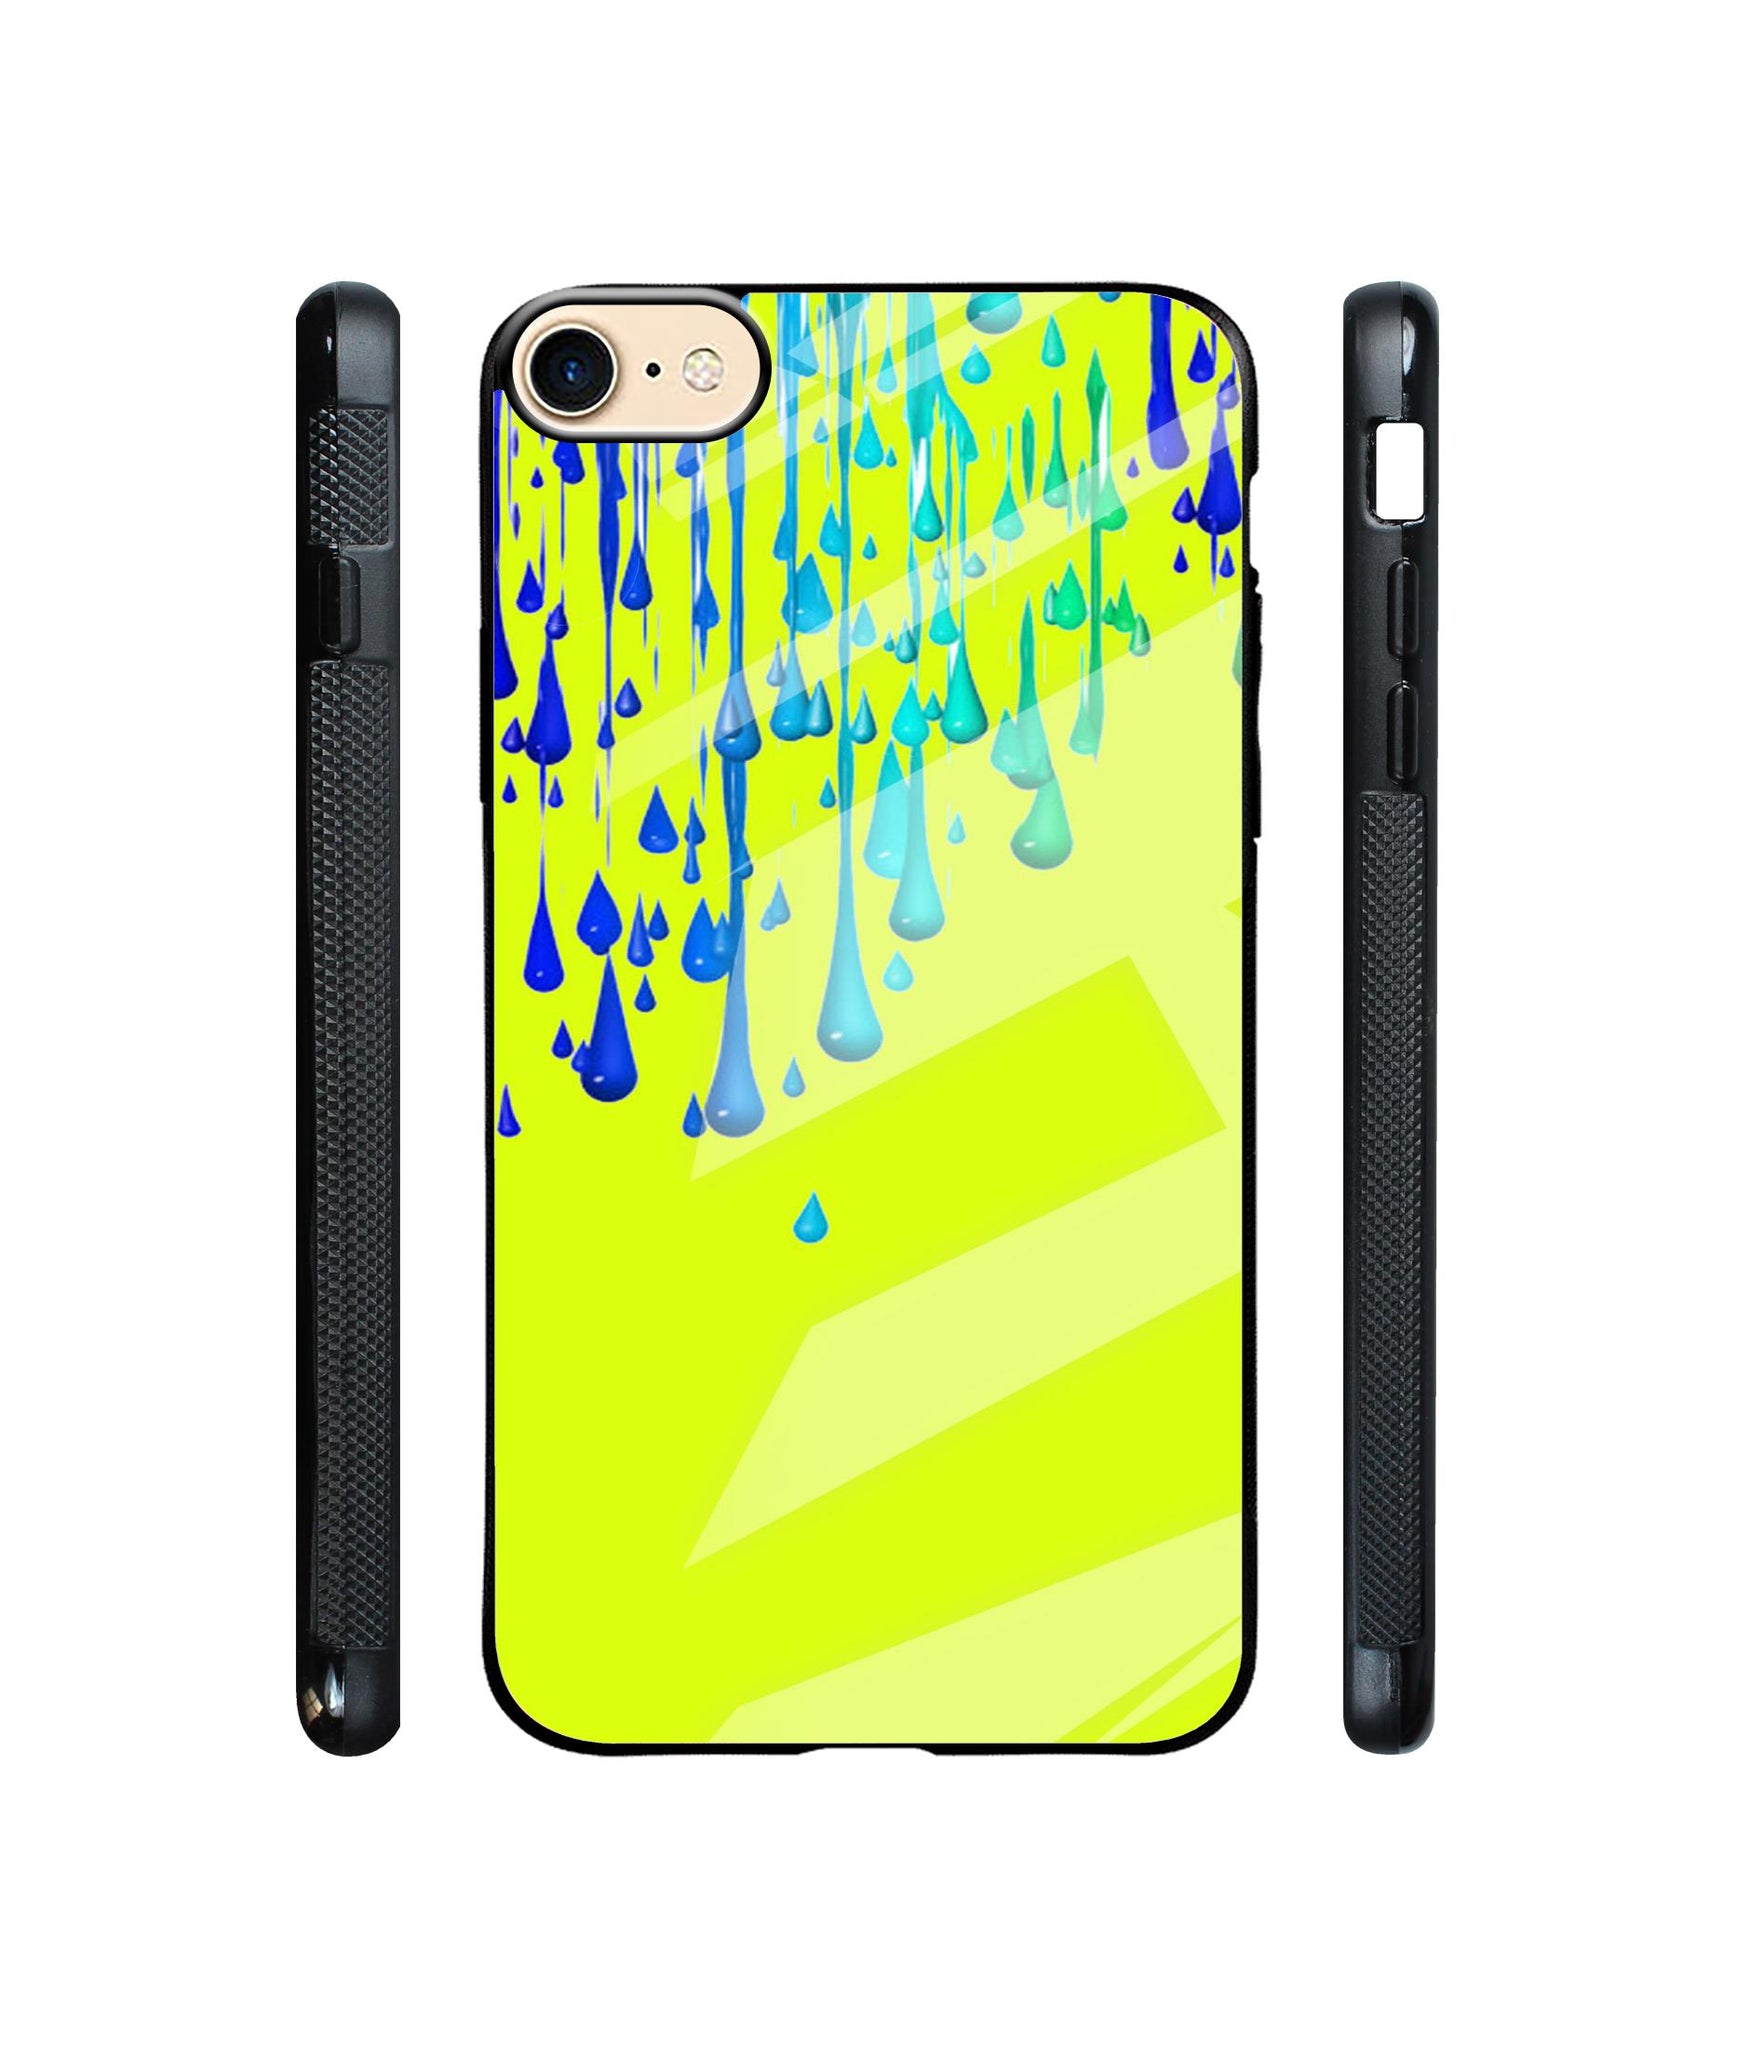 Neon Paint Designer Printed Glass Cover for Apple iPhone 7 / iPhone 8